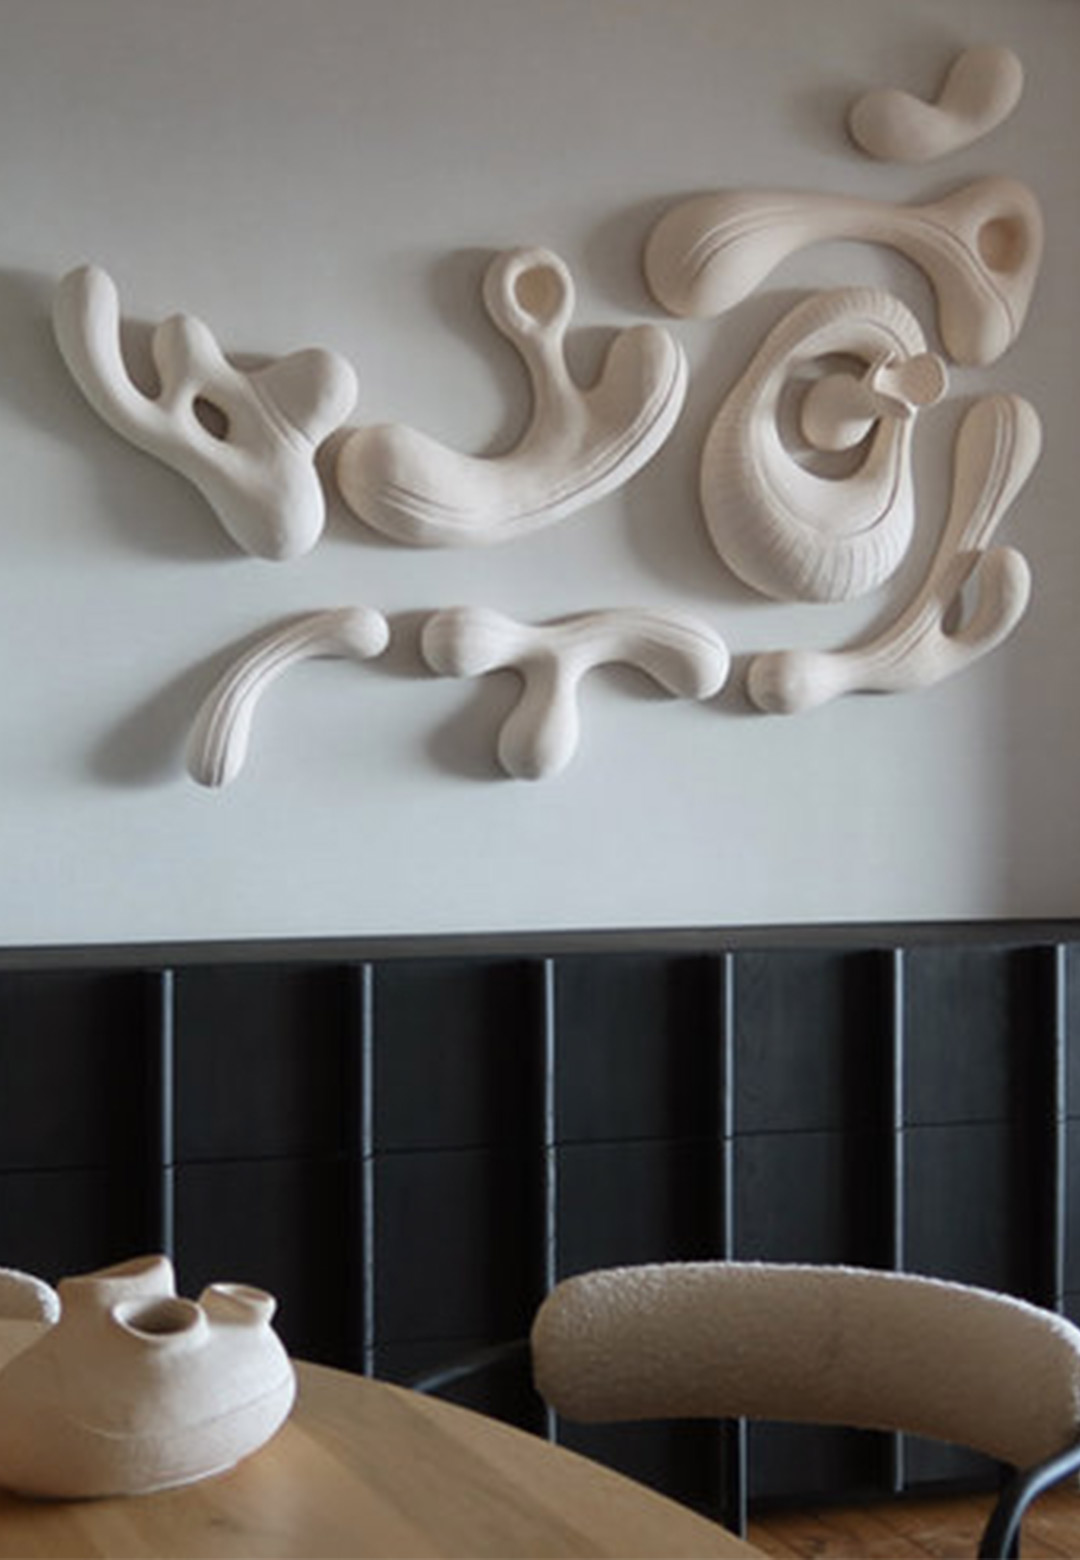 ‘Chance and Chaos’: A ceramic wall mural inspired by nature's fury and tranquility